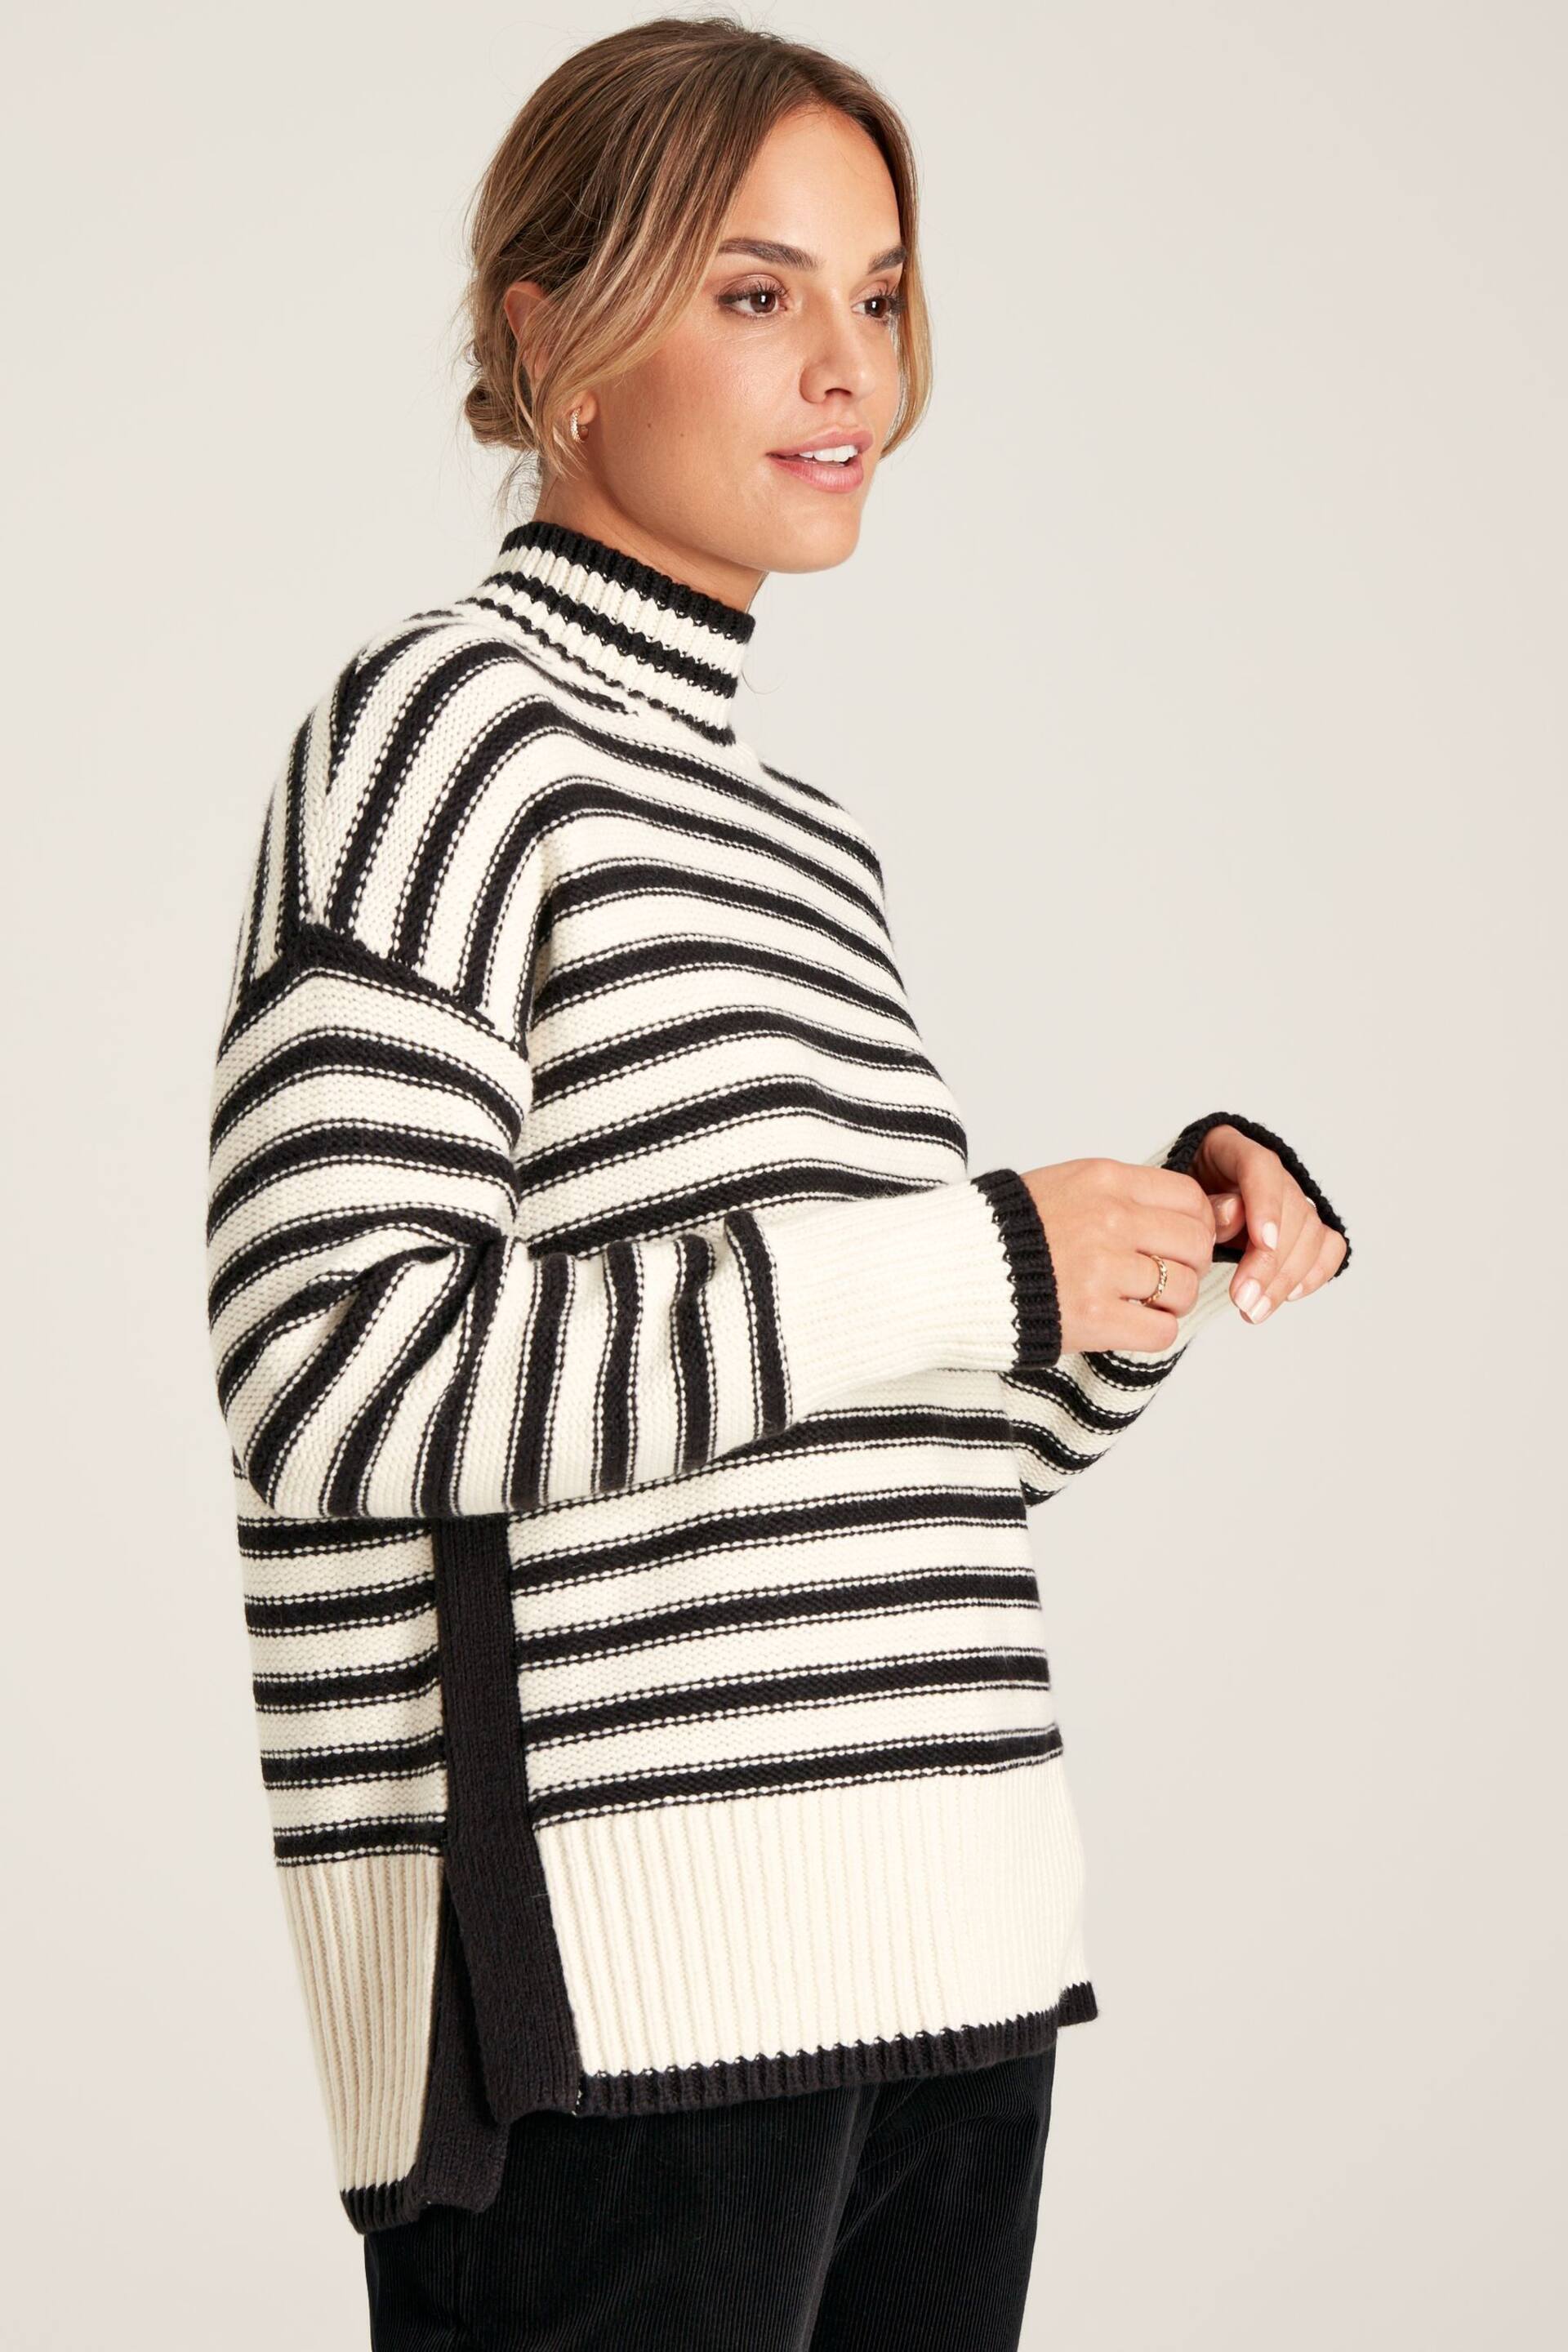 Joules Tandie Black/Cream Striped High Neck Jumper - Image 4 of 7